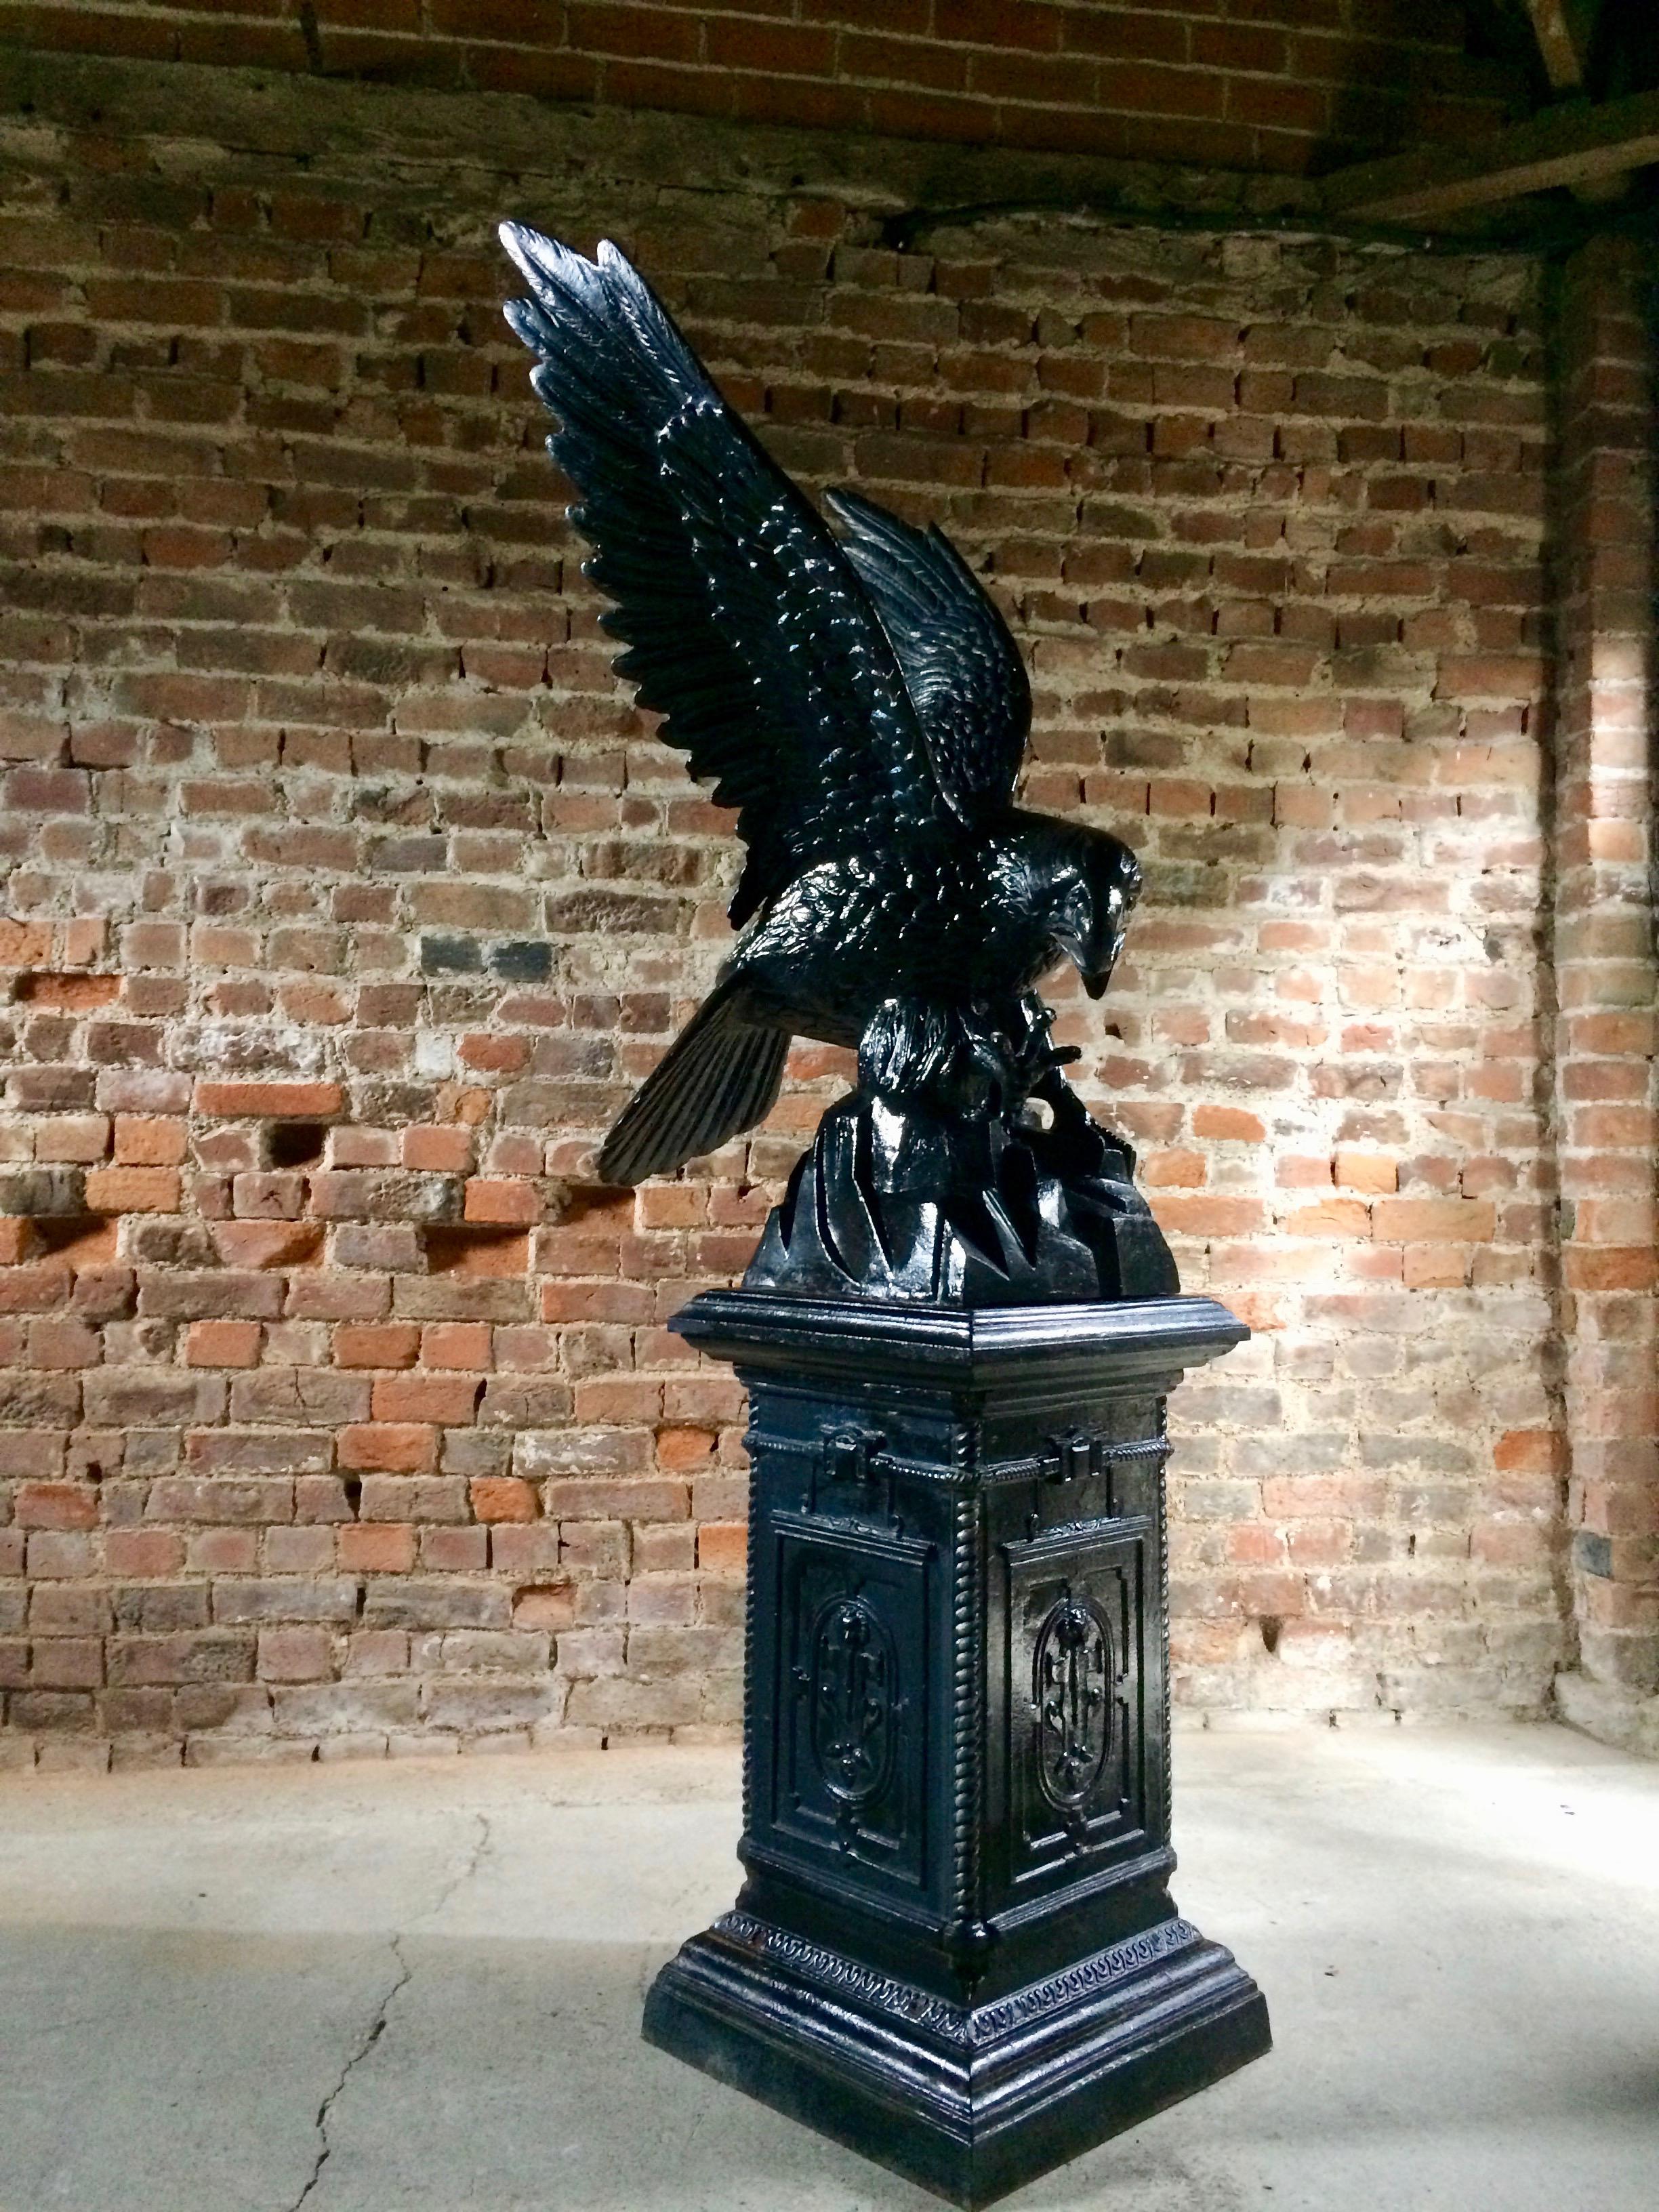 Fabulous large antique cast iron eagle on pedestal dating to late 19th century early 20th century, with outstretched wings sitting on a rock and raised on a tall square pedestal, will enhance any garden. courtyard or front of house entrance, please